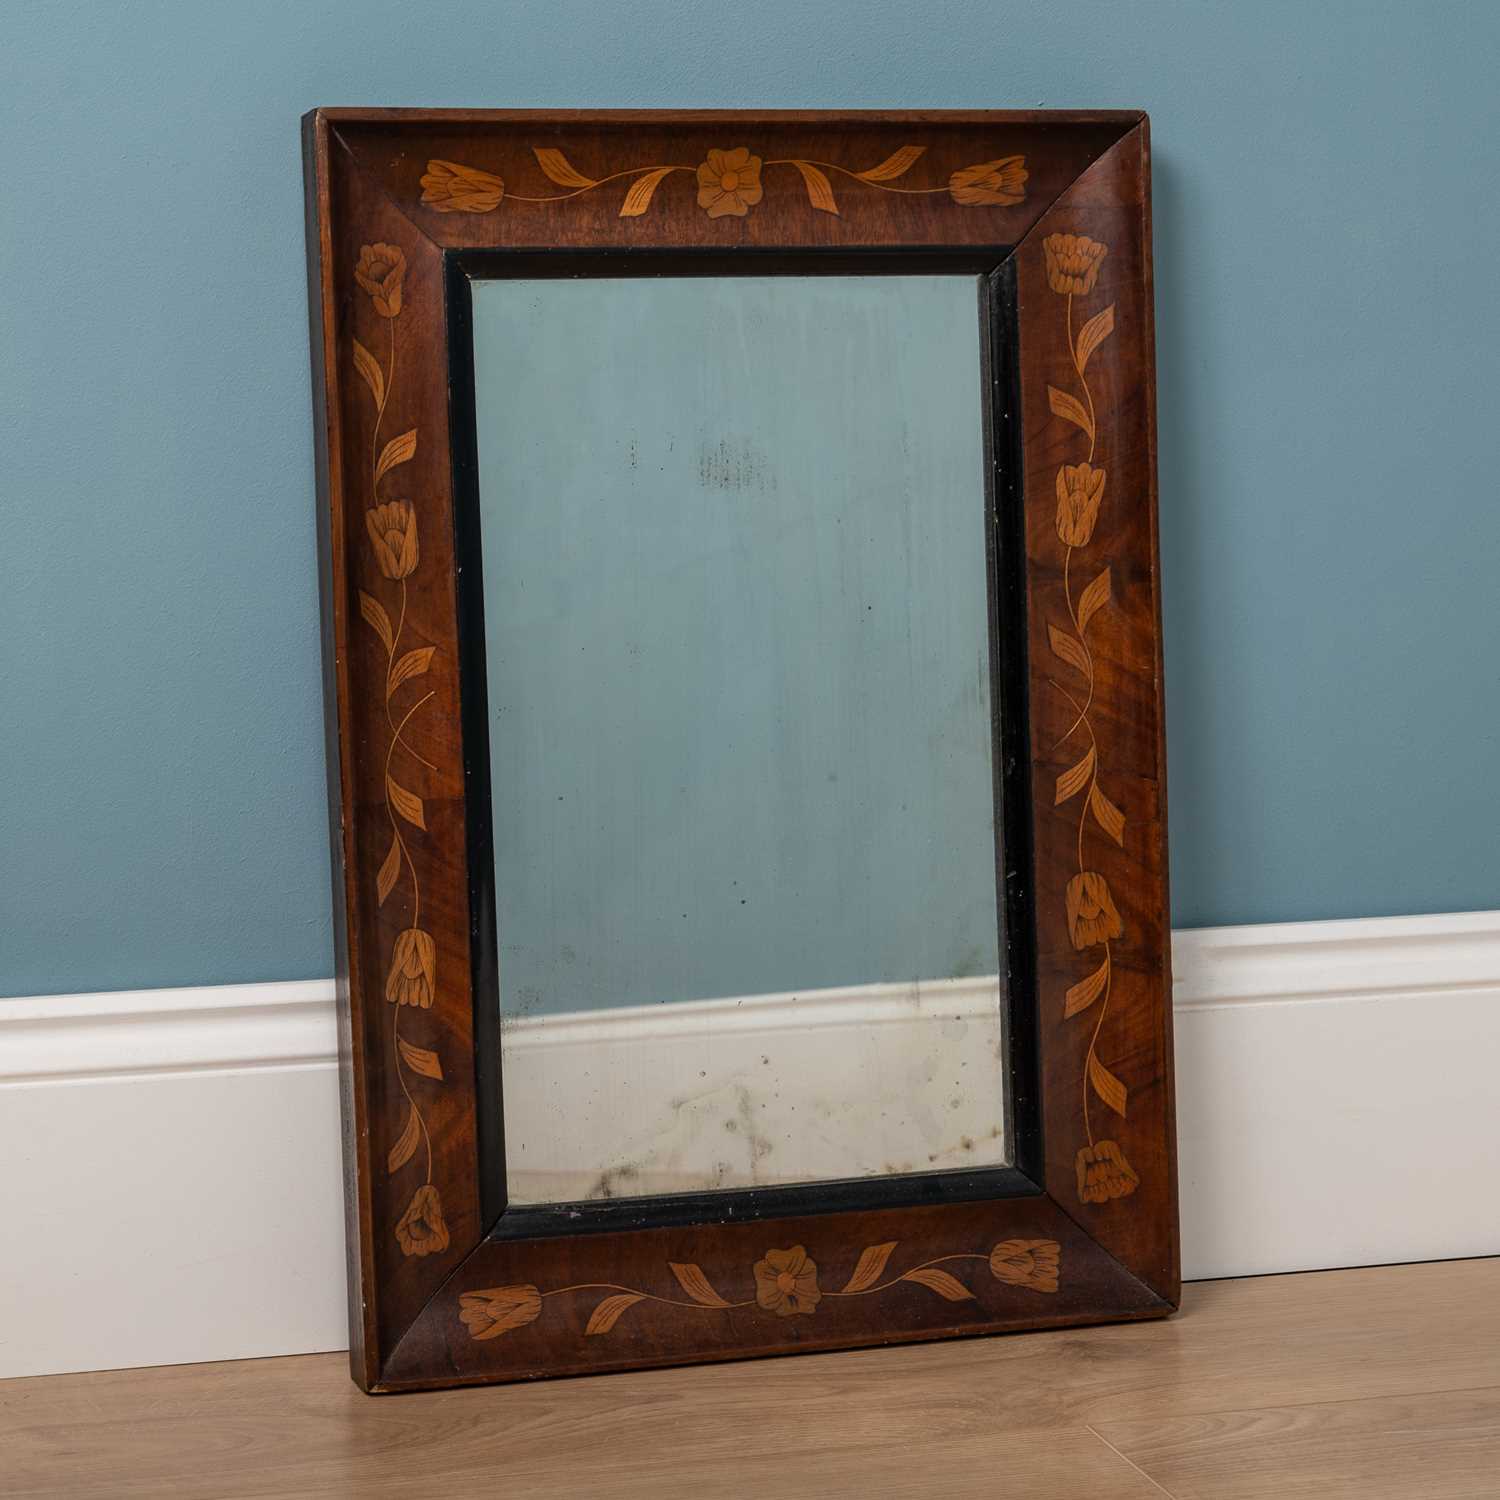 Lot 60 - A Dutch mahogany wall mirror with floral marquetry inlay